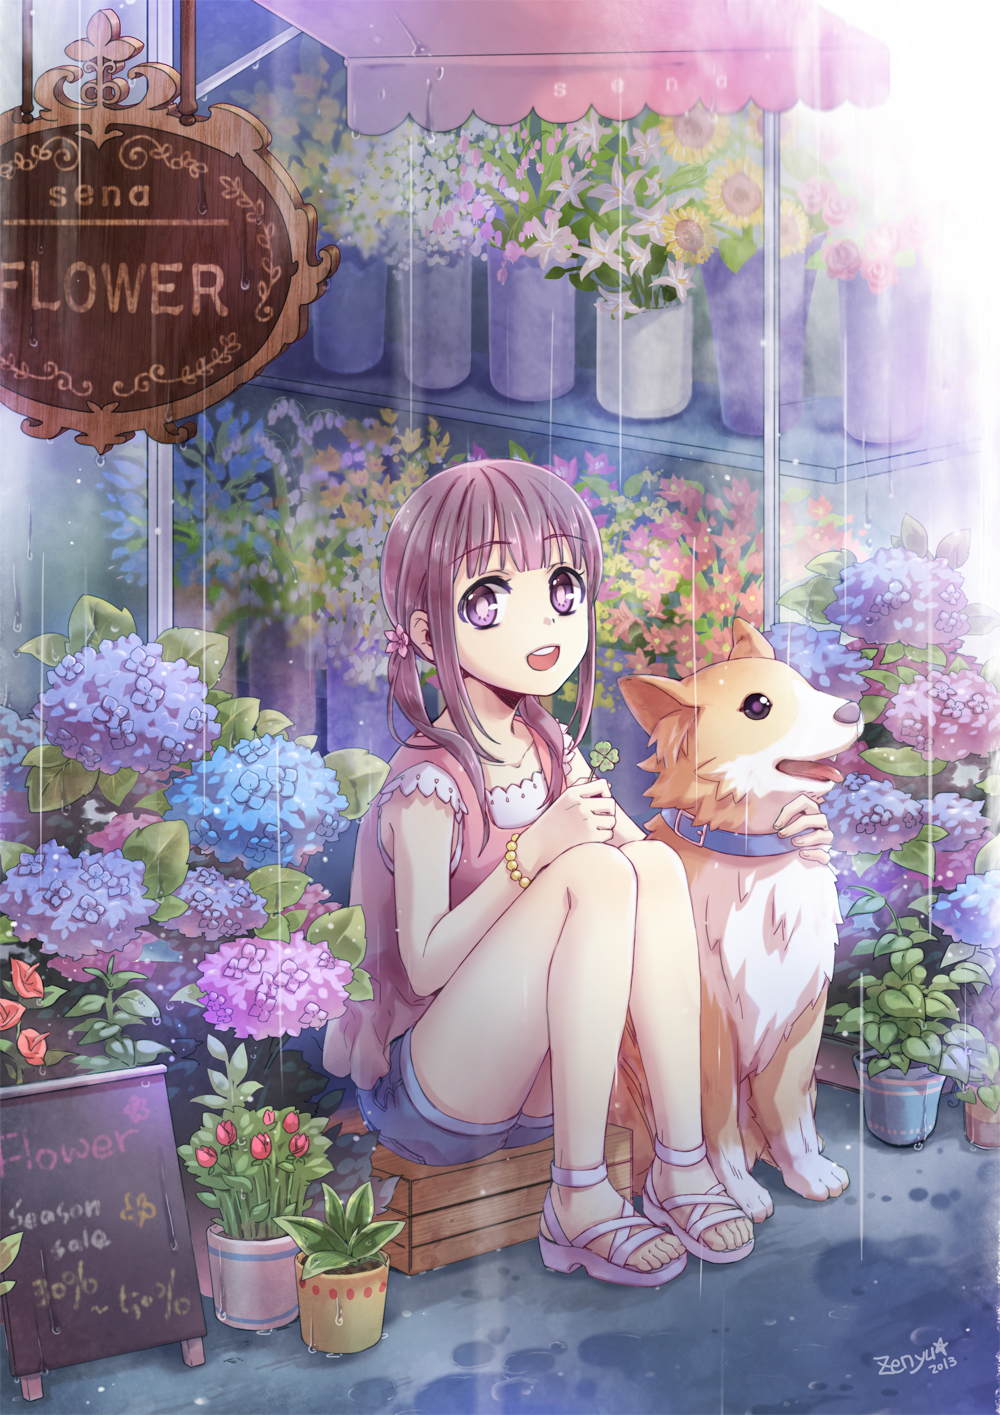 2013 :d animal animal_hug bangs bare_legs bare_shoulders blouse blunt_bangs bracelet clover collar dog flower flower_pot flower_shop four-leaf_clover full_body hair_flower hair_ornament hair_over_shoulder highres hydrangea jewelry legs lily_(flower) long_hair looking_at_viewer open_mouth original outdoors pink_blouse plant potted_plant purple_eyes purple_hair rain sandals shelf shop shorts sign signature sitting sleeveless smile solo sunflower toes twintails zenyu